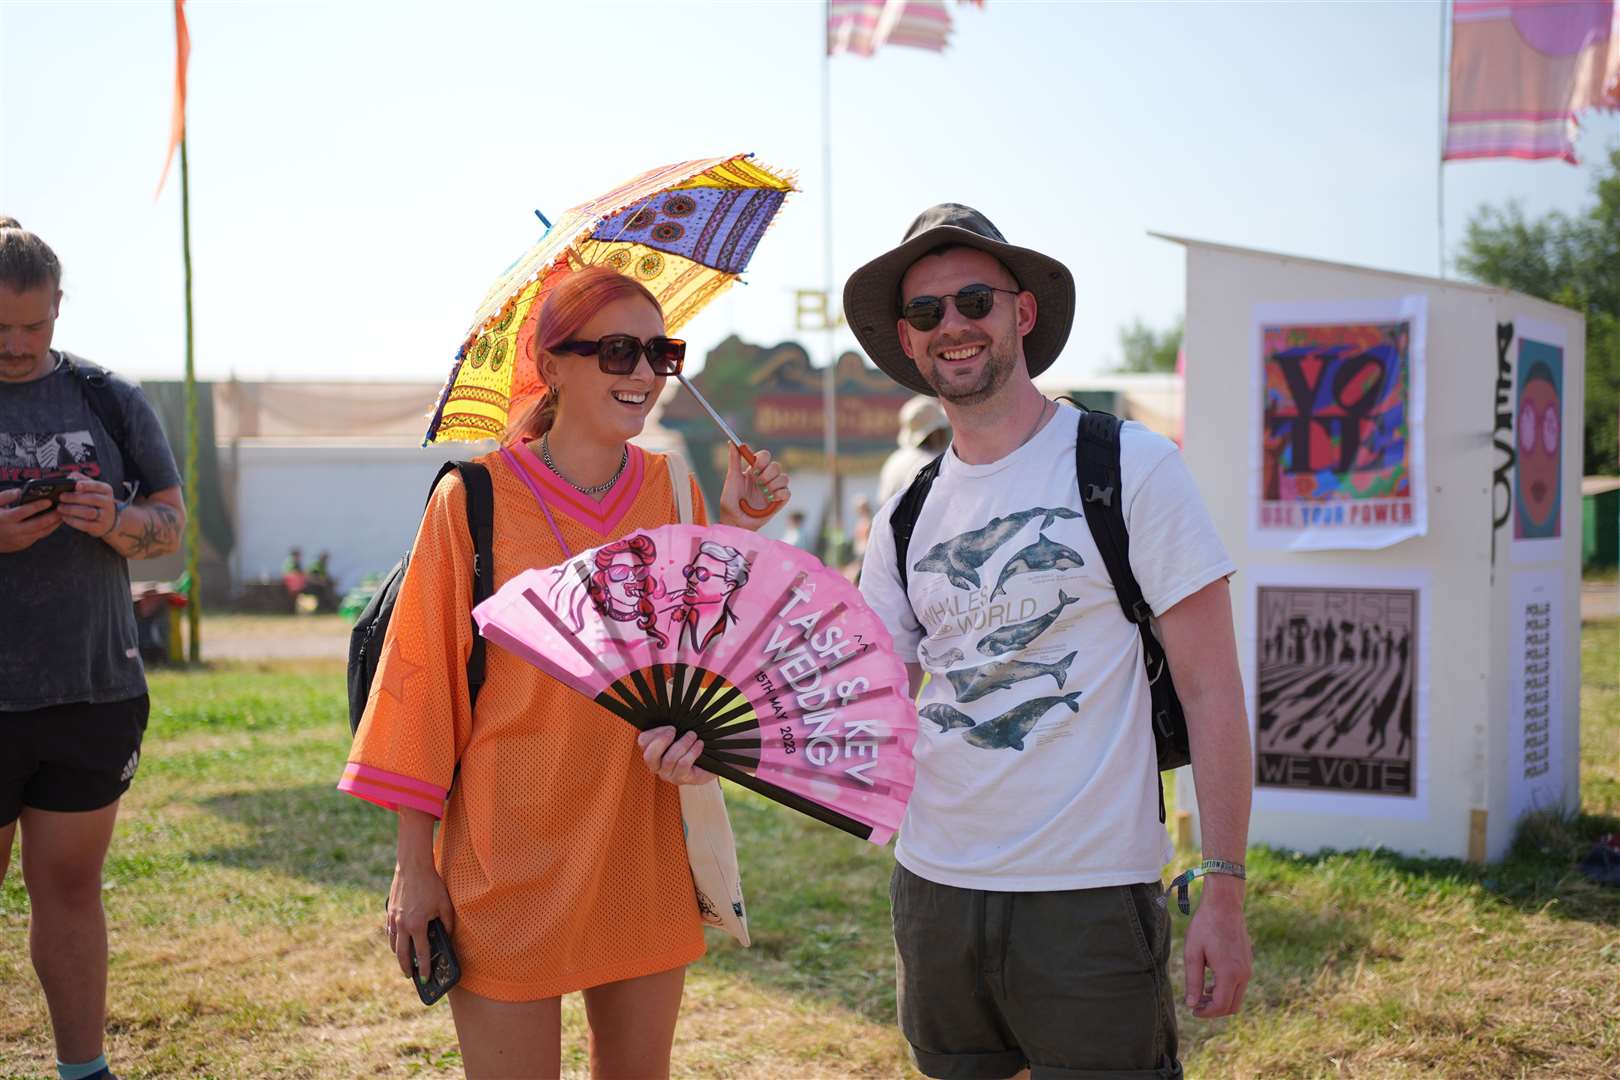 Some festivalgoers arrived prepared with fans and parasols (Yui Mok/PA)